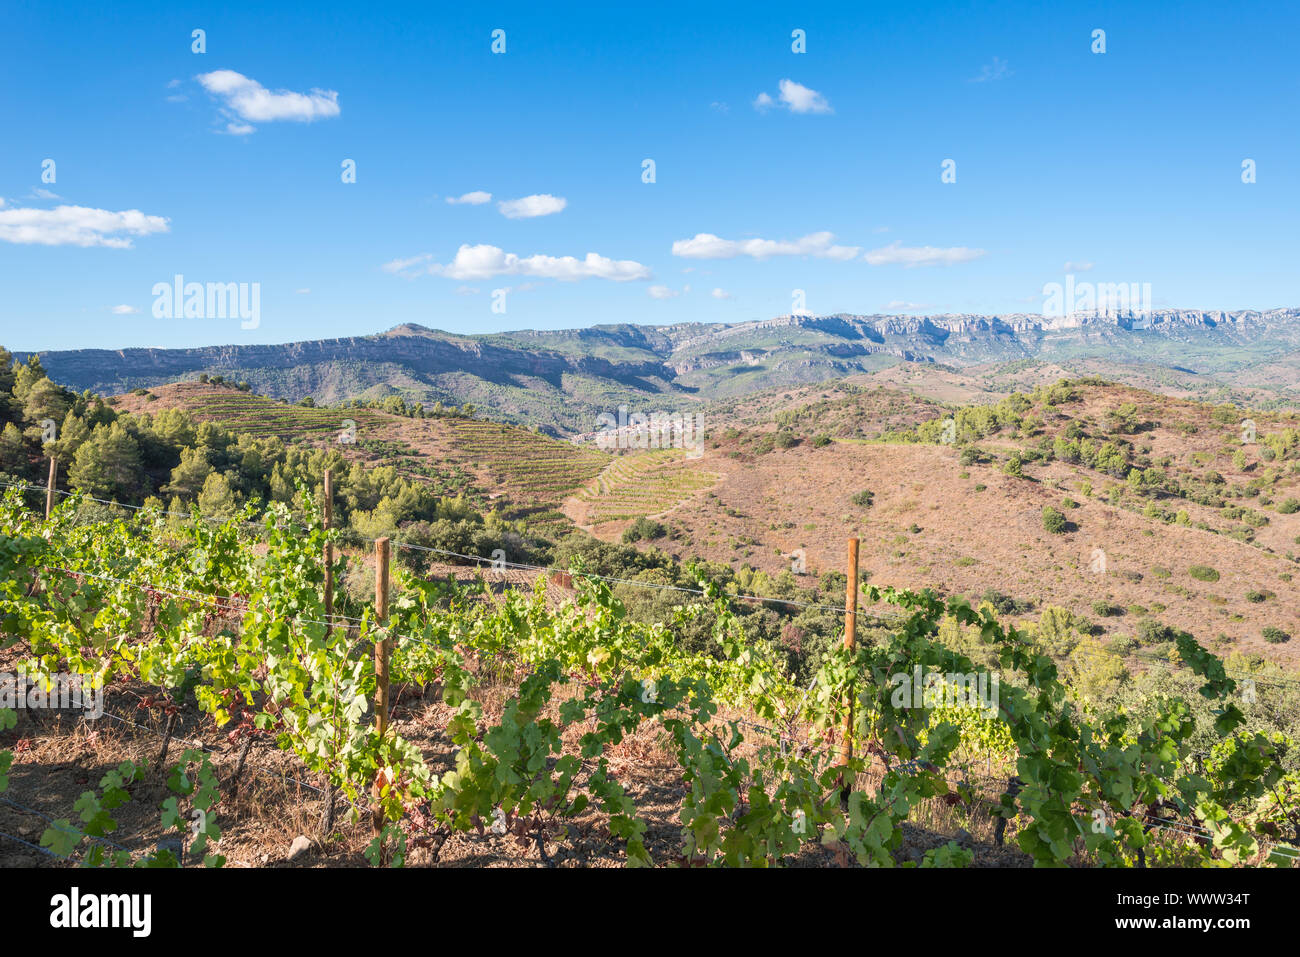 Vineyards and vine n the hills of the Montsant county, Spain Stock Photo